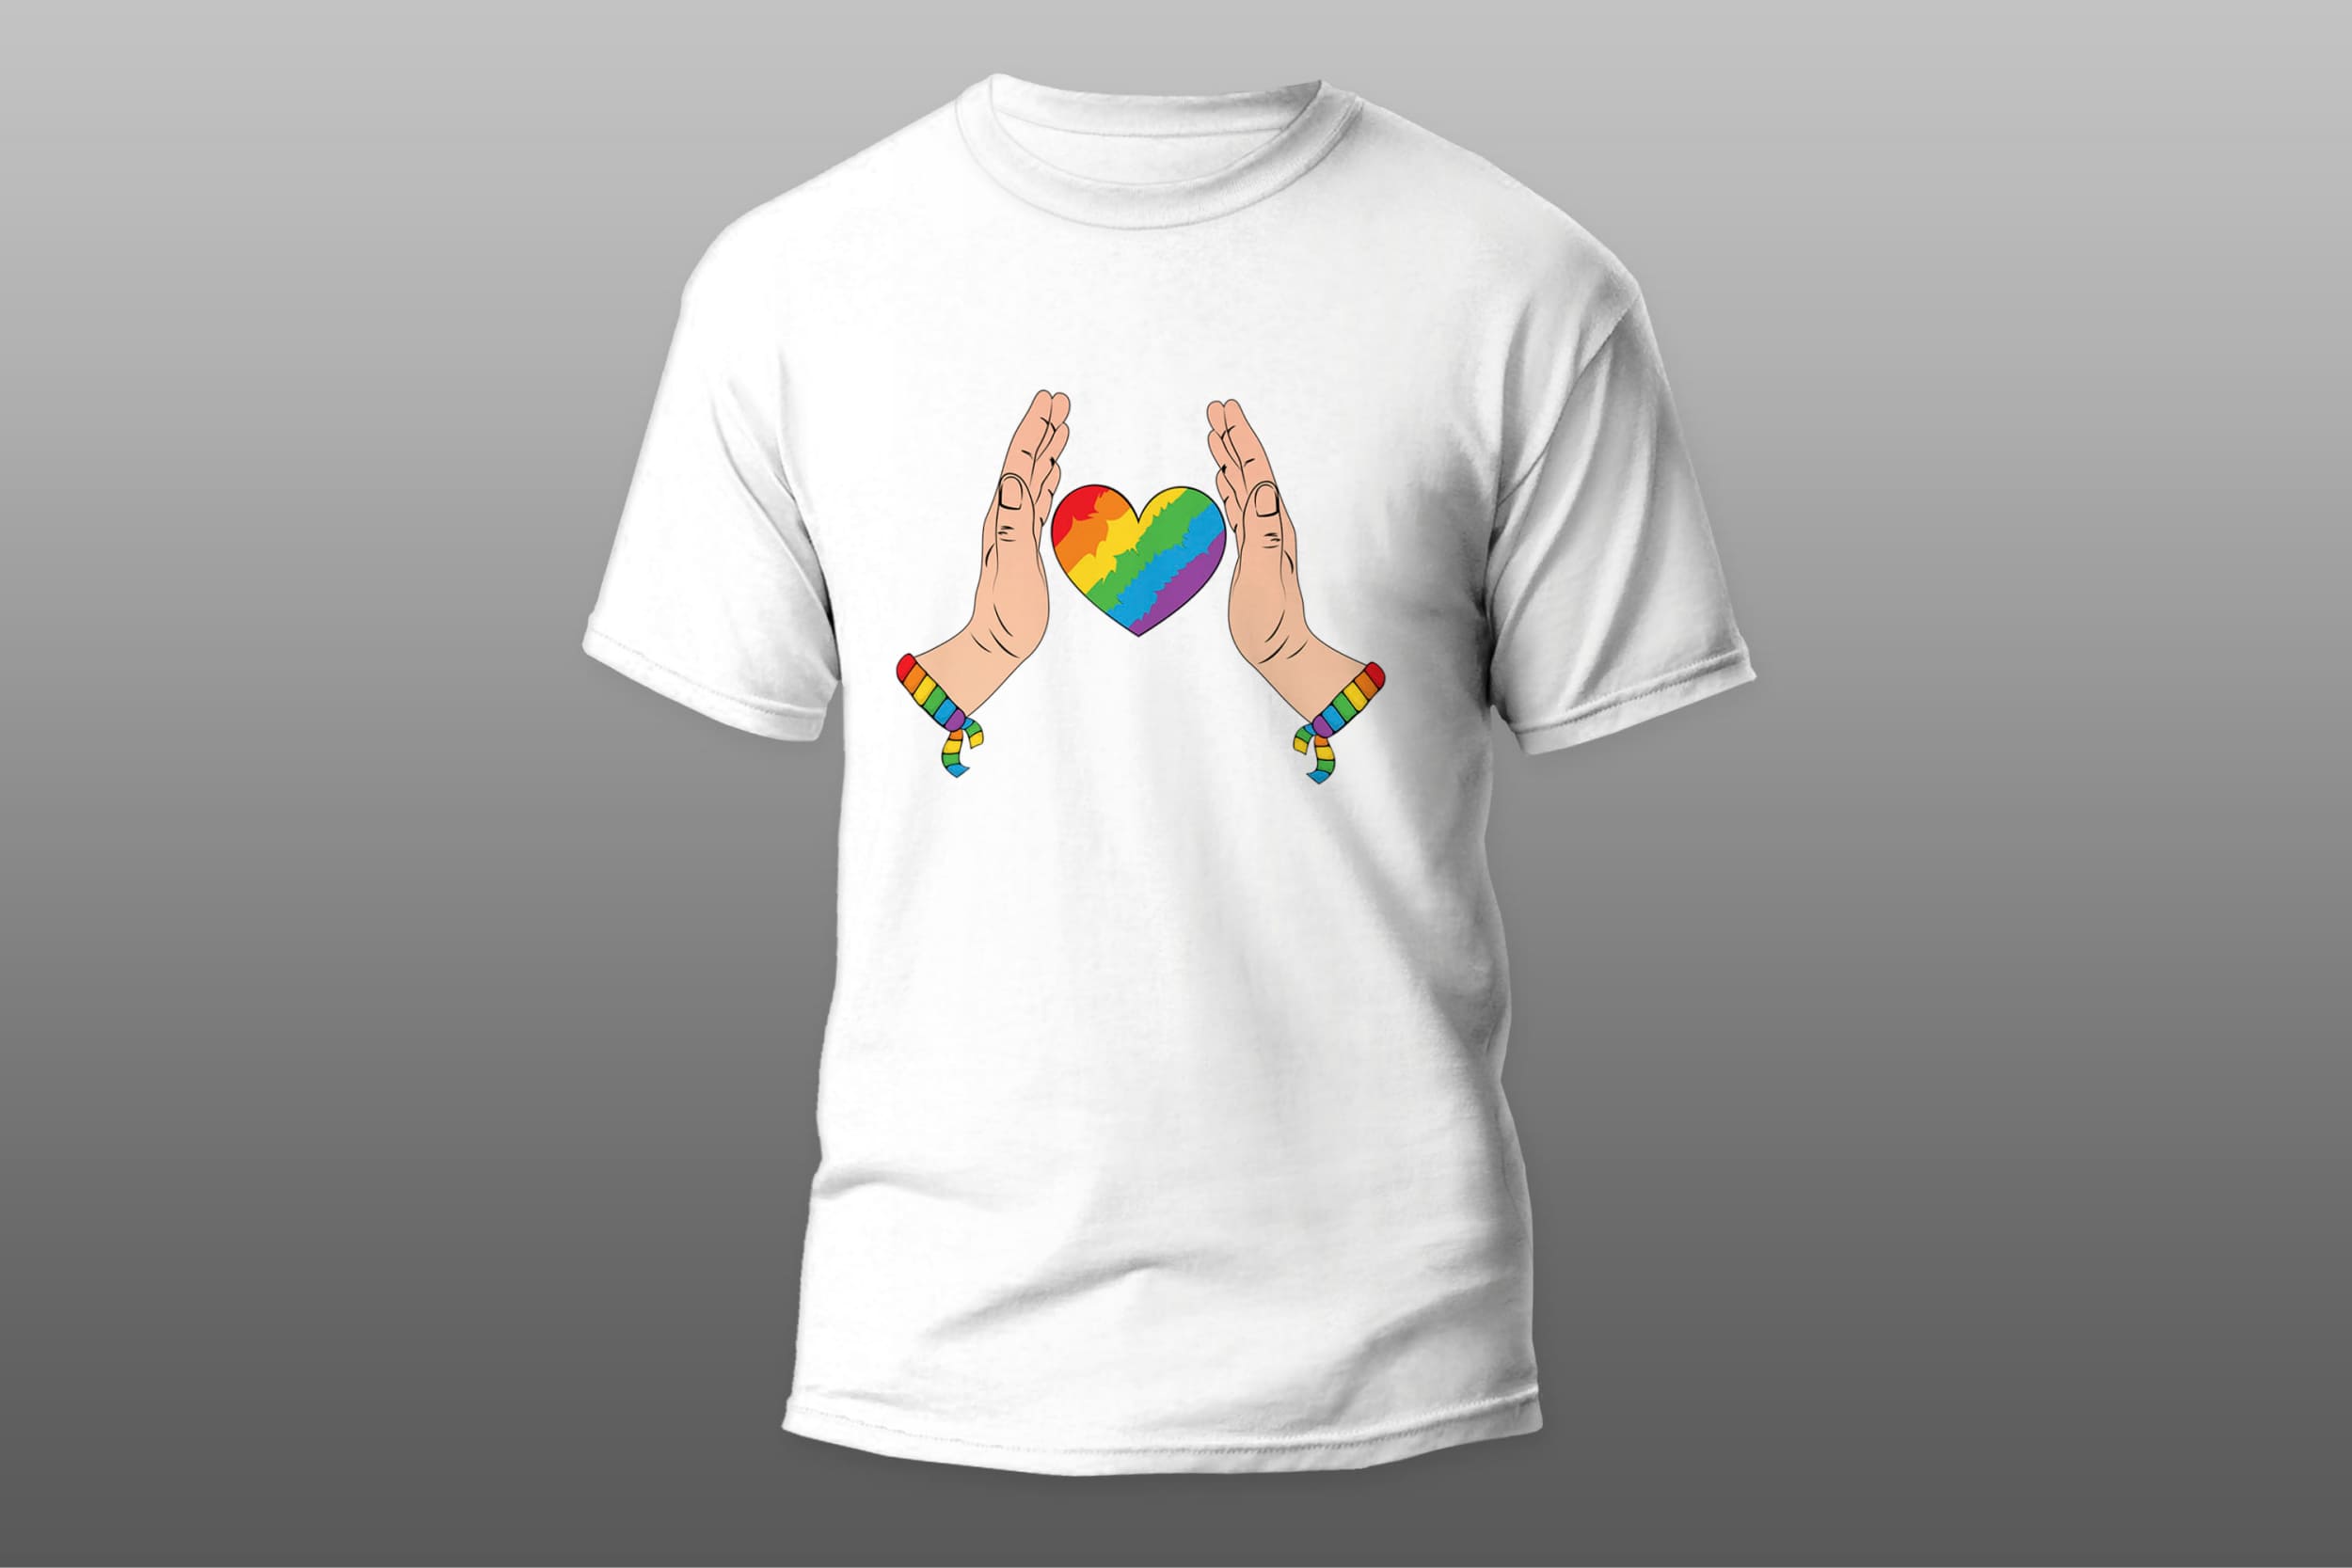 White T-shirt with the image of hands holding a heart in the colors of the LGBT flag on a gray background.